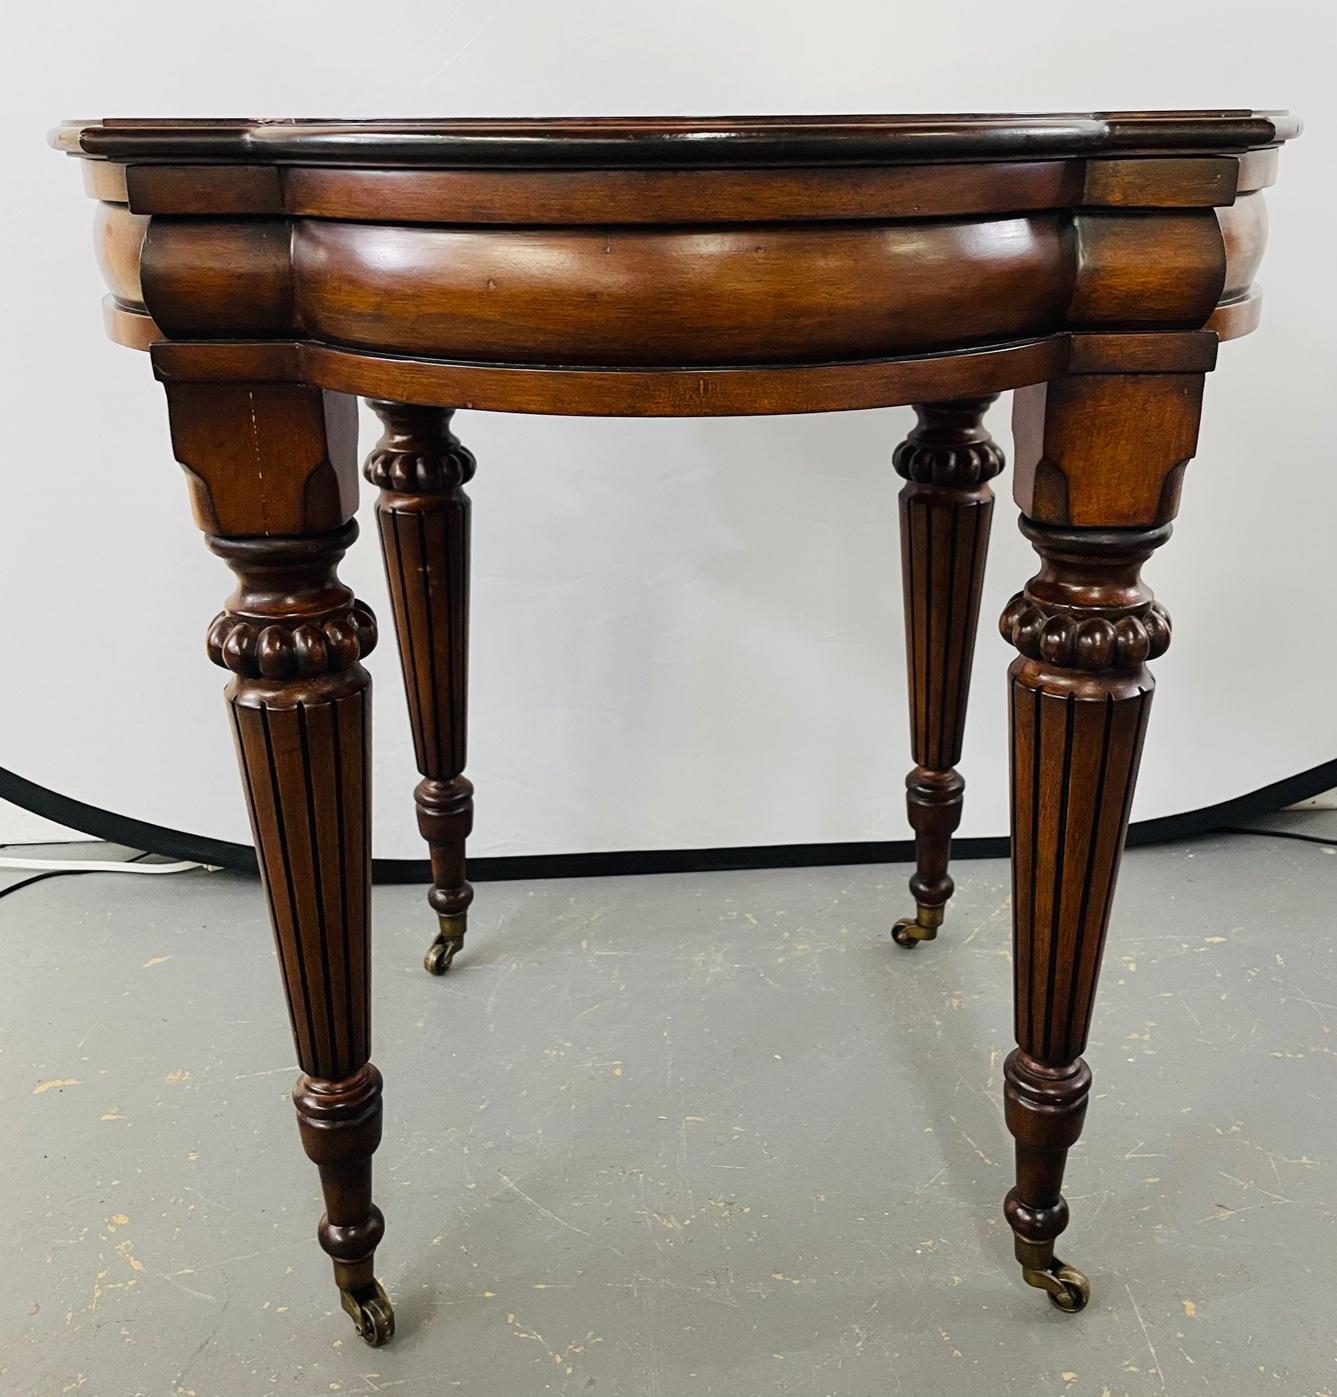 American Classical Tuscany Marquetry End Table with Casters by Ethan Allen